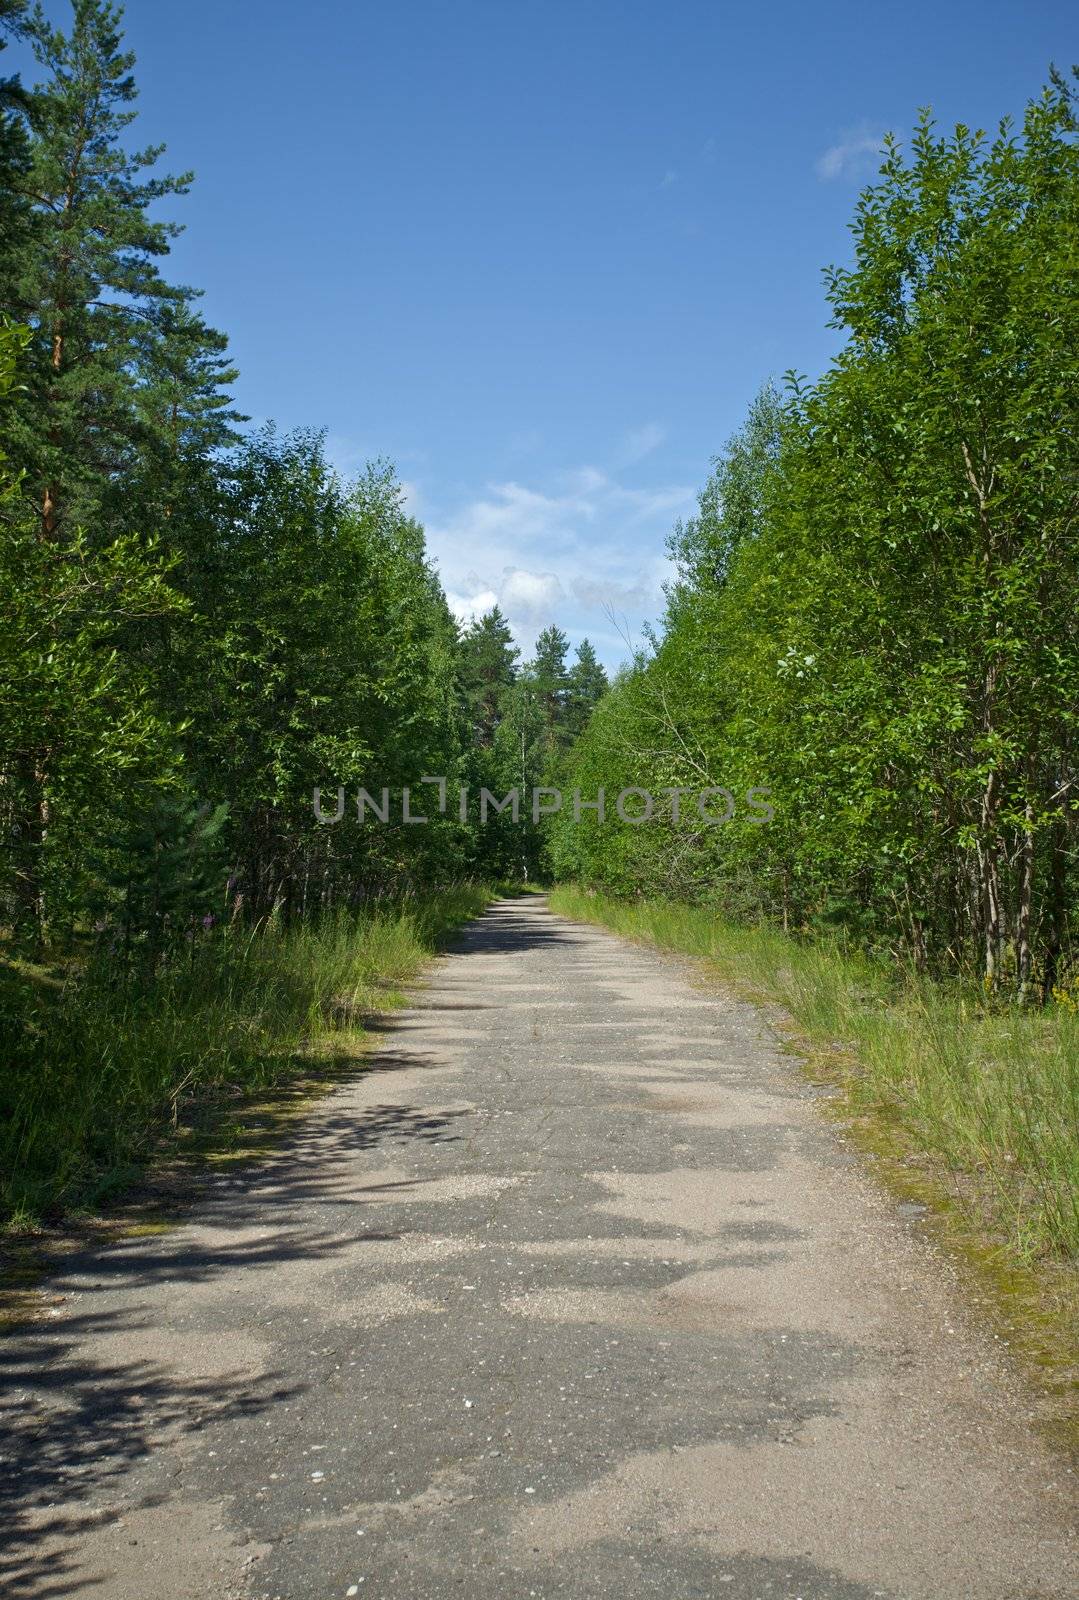 road in tree forest at summer day